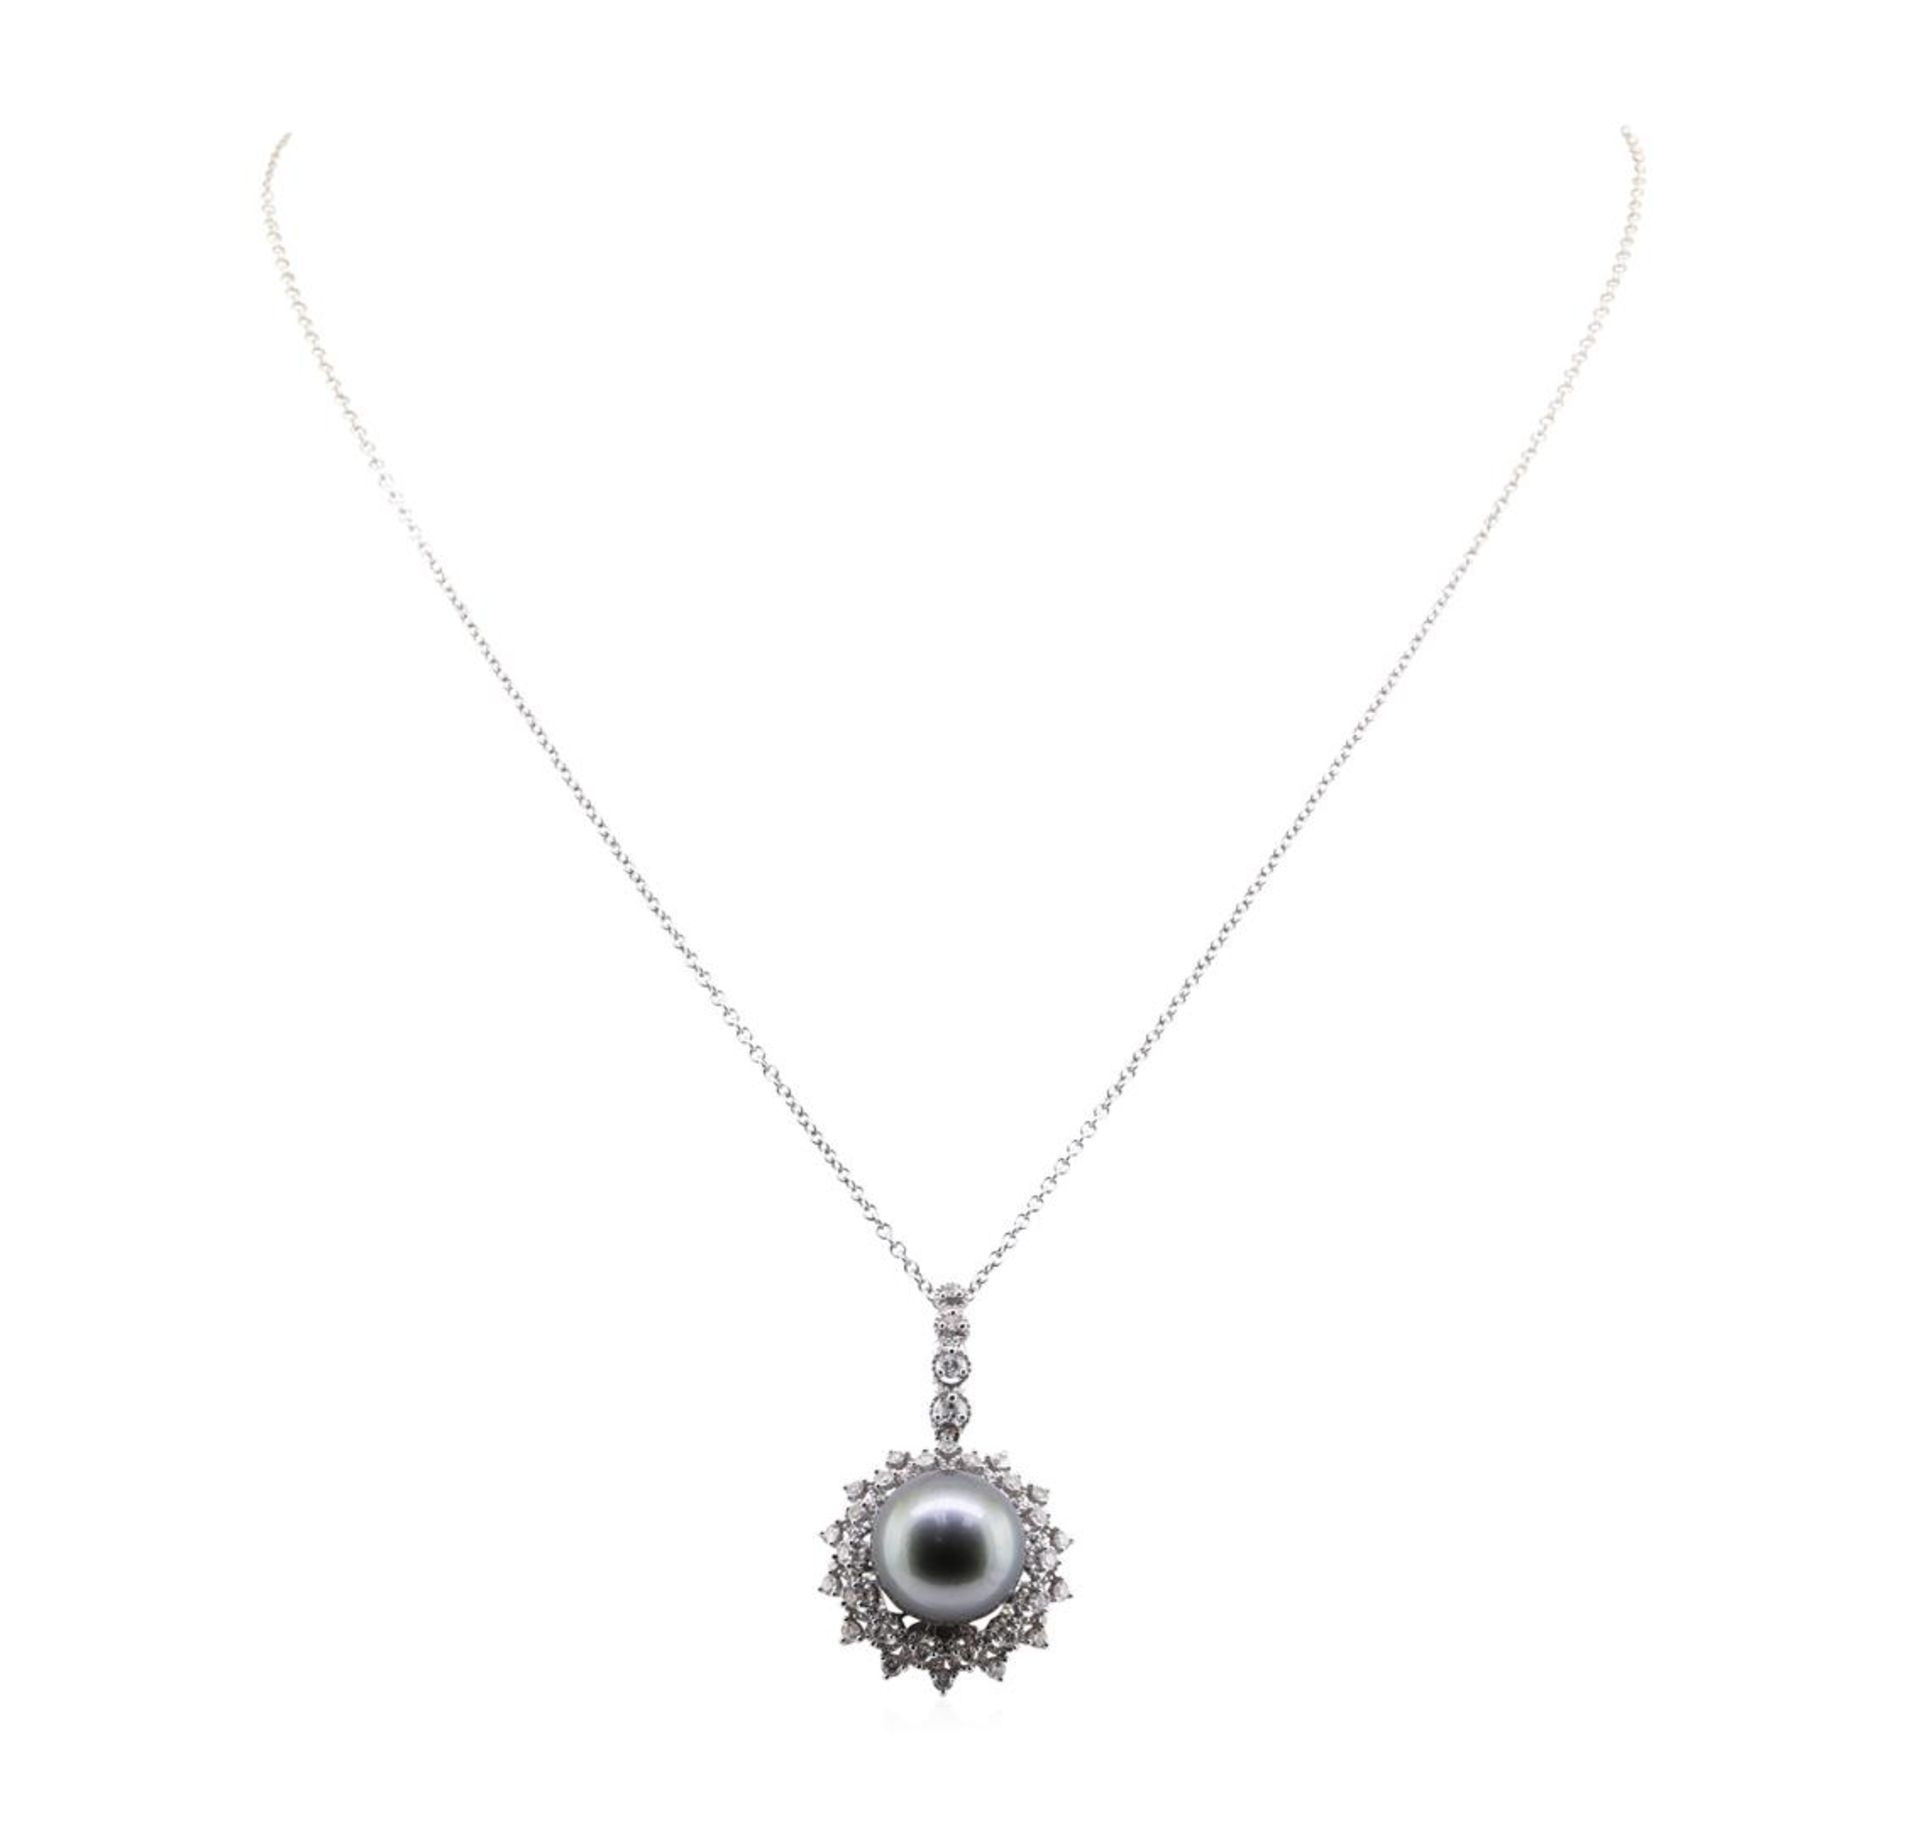 Pearl and Diamond Pendant With Chain - 18KT White Gold - Image 2 of 3